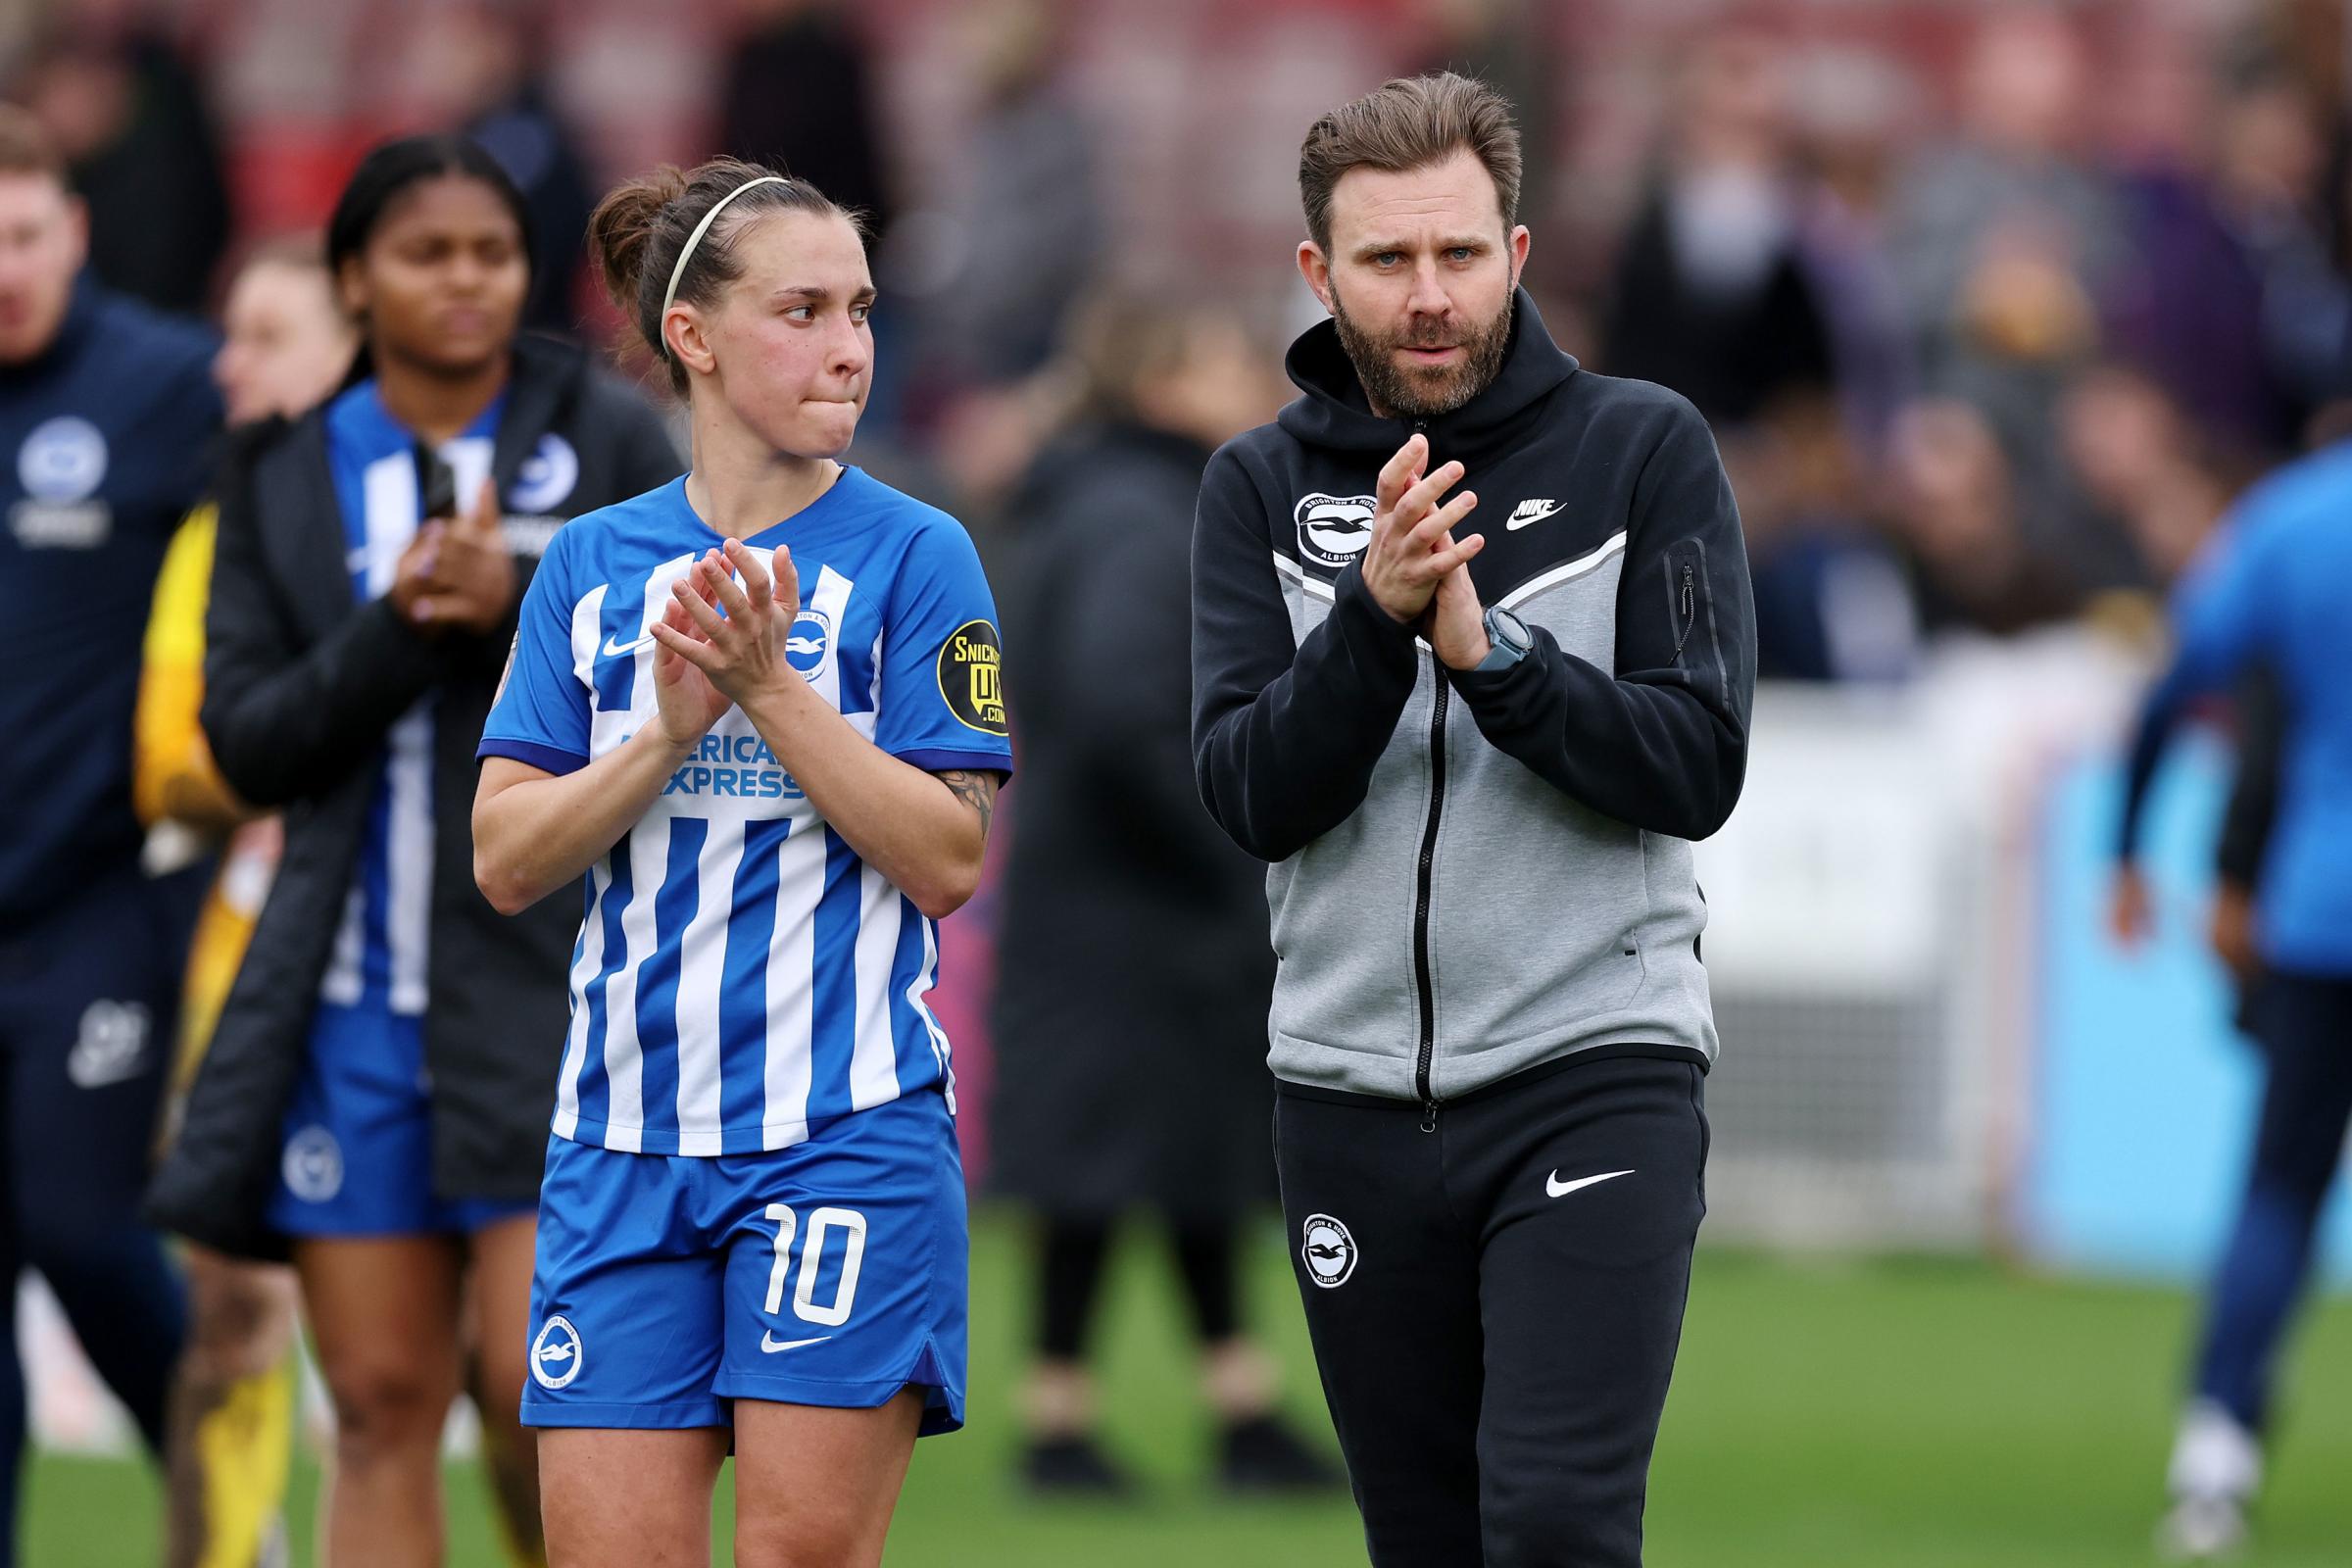 Arsenal v Brighton: Mikey Harris on tactical change for WSL team